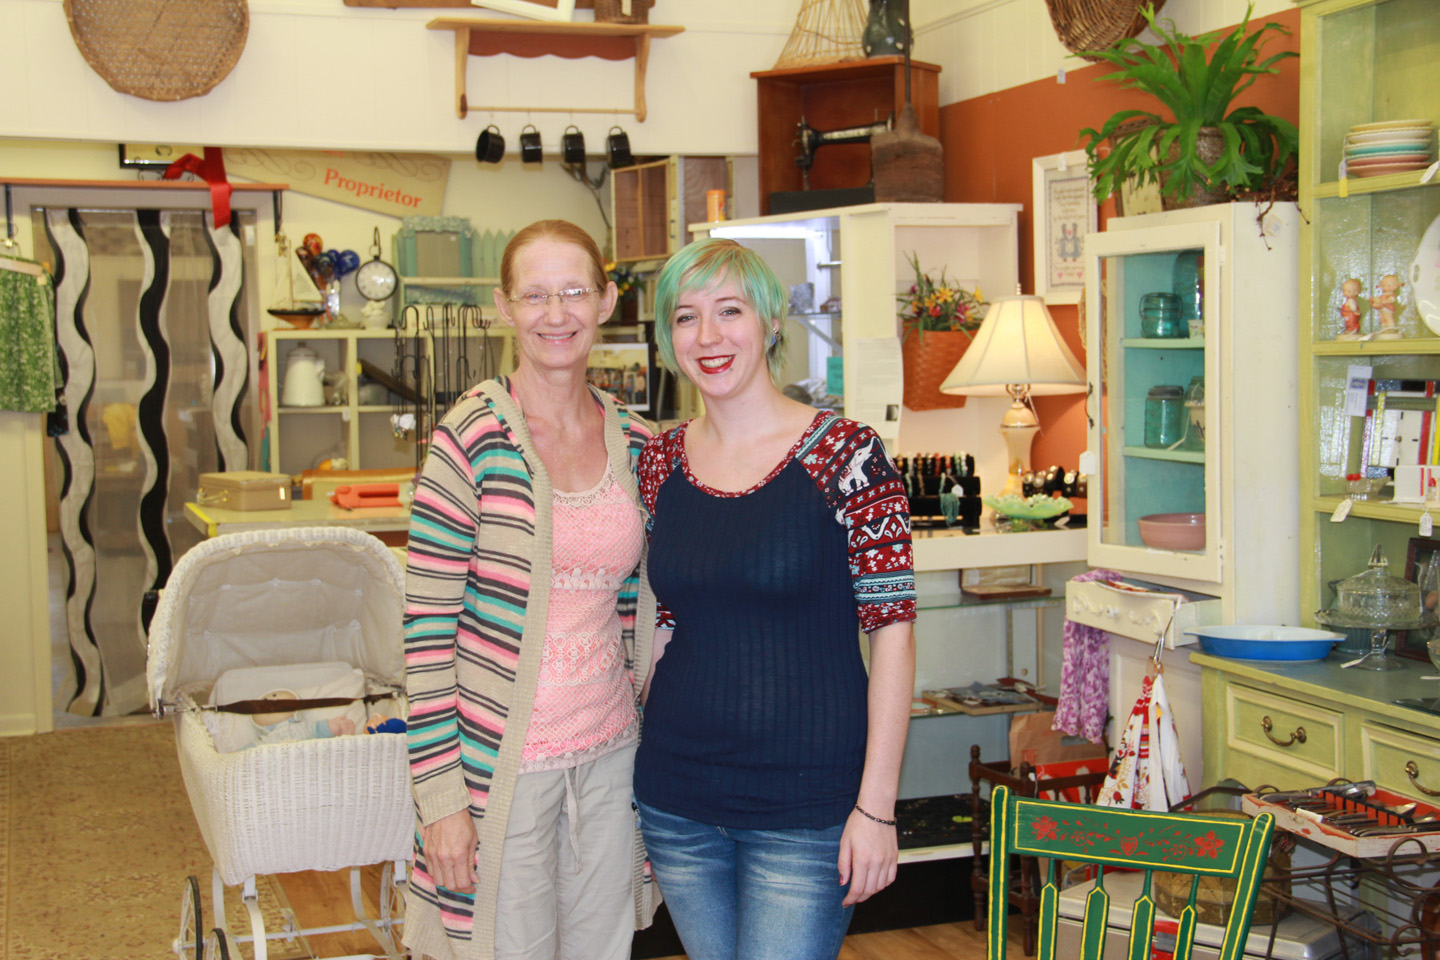 Melody Blair and her daughter, Callie, are the proprietors of Minnie Lane, 112 East Third Street, Maryville. The shop offers shabby chic vintage items such as jewelry, hats and needle work.